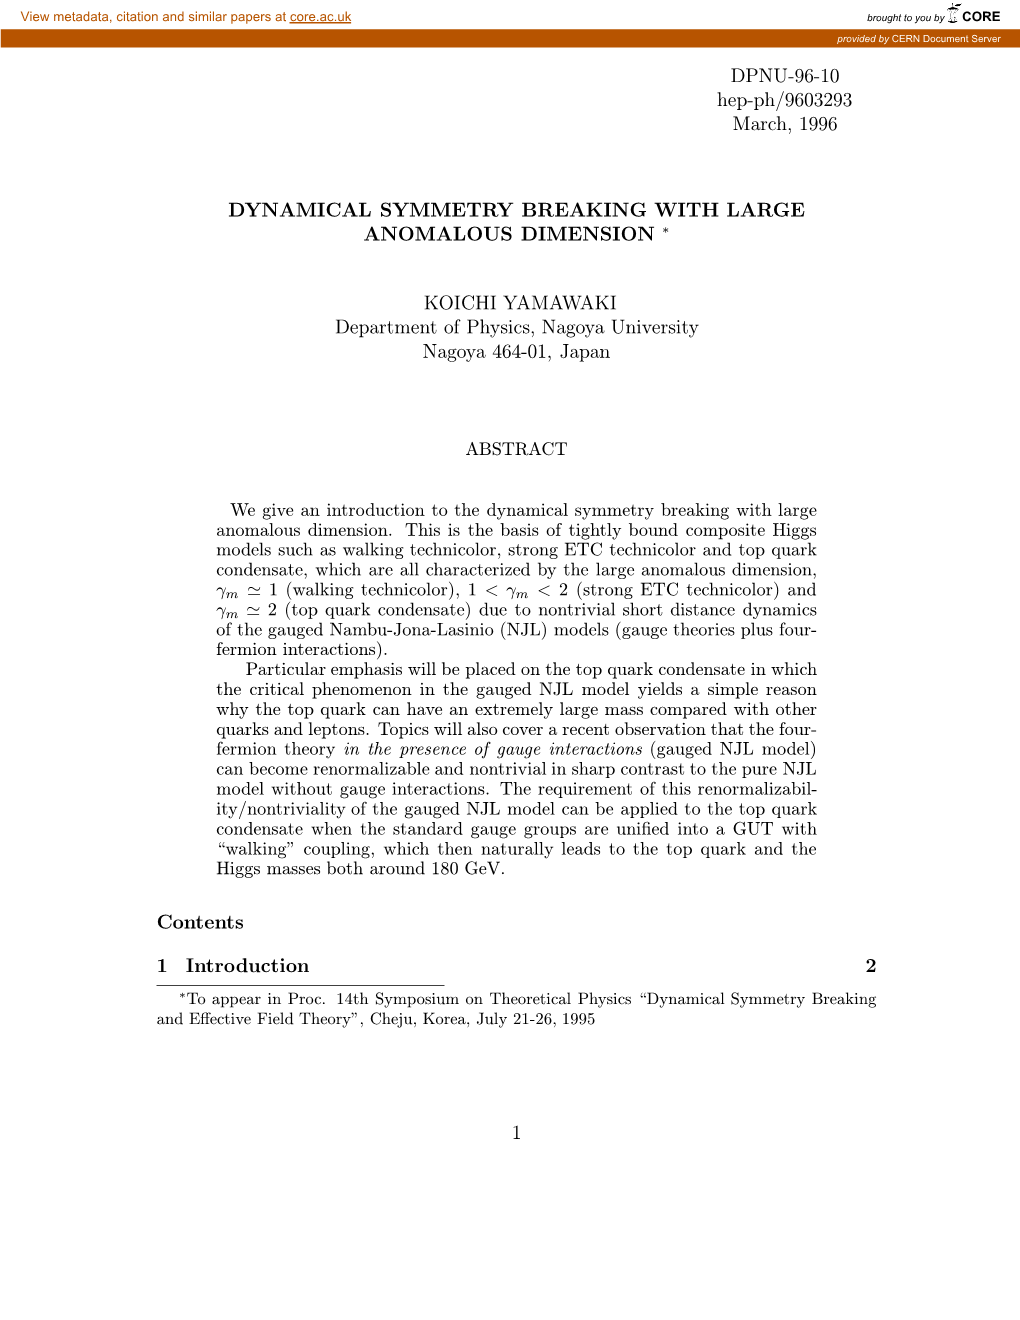 Dynamical Symmetry Breaking with Large Anomalous Dimension ∗